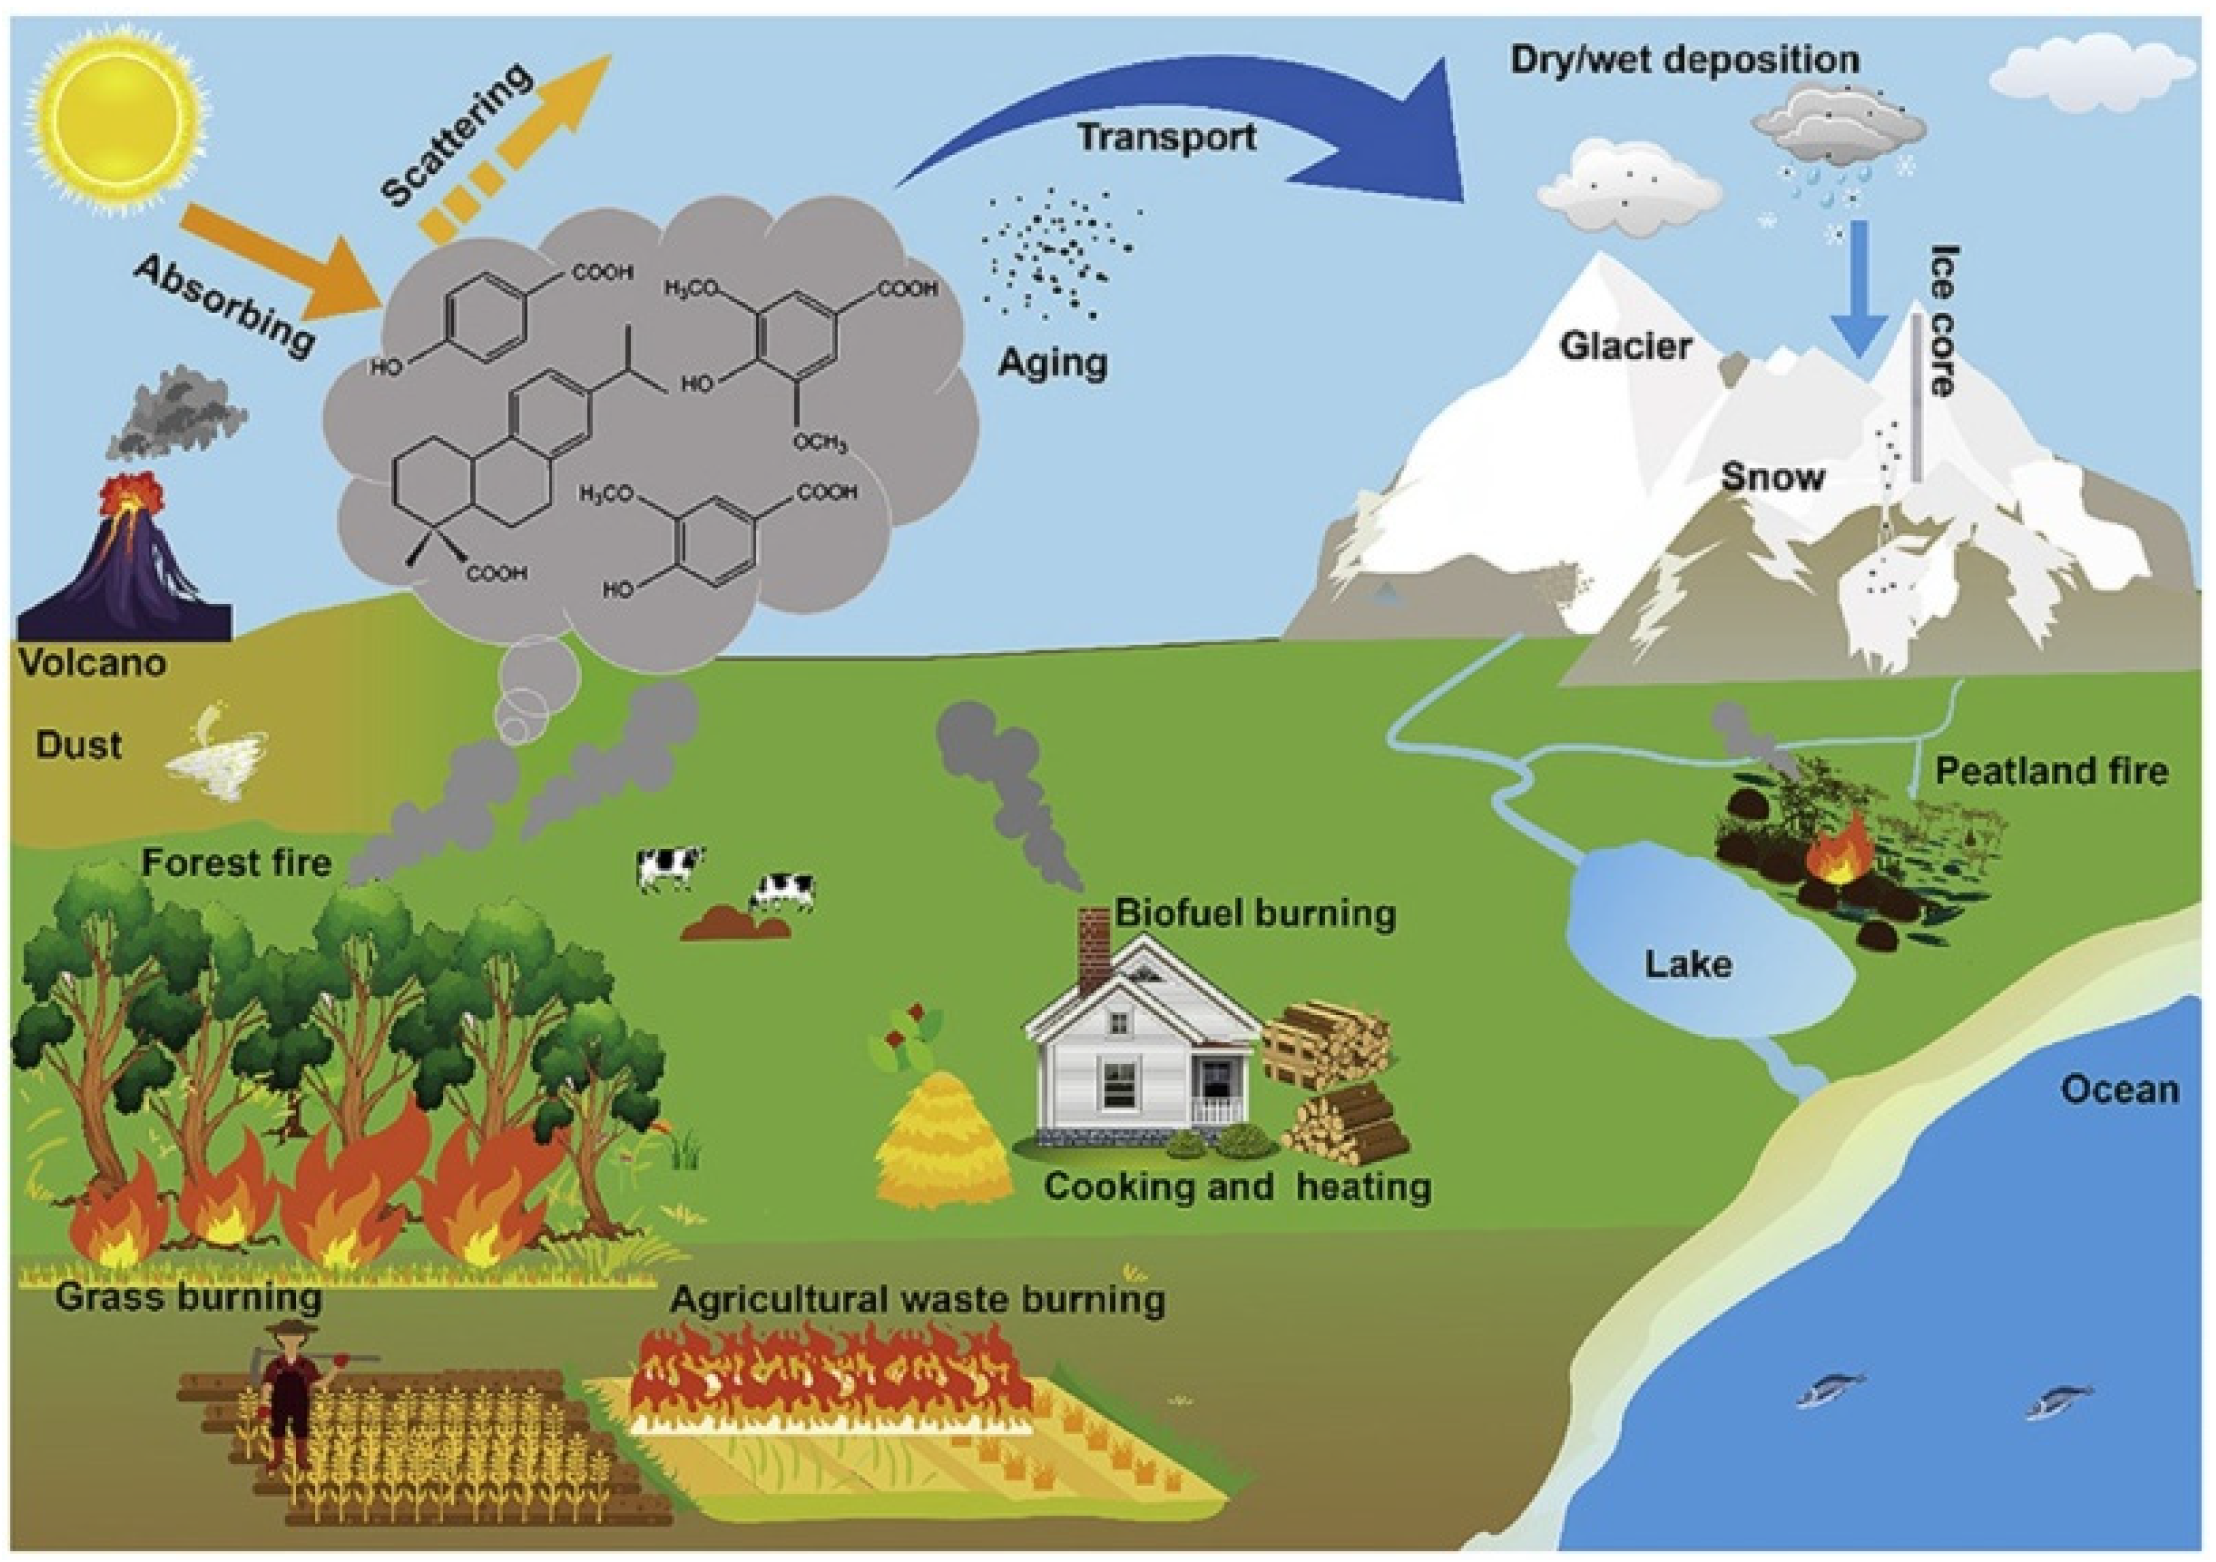 Biomass Tracers Burning Full-Text of Biomass Identification Burning from | Atmosphere Free and | Emissions